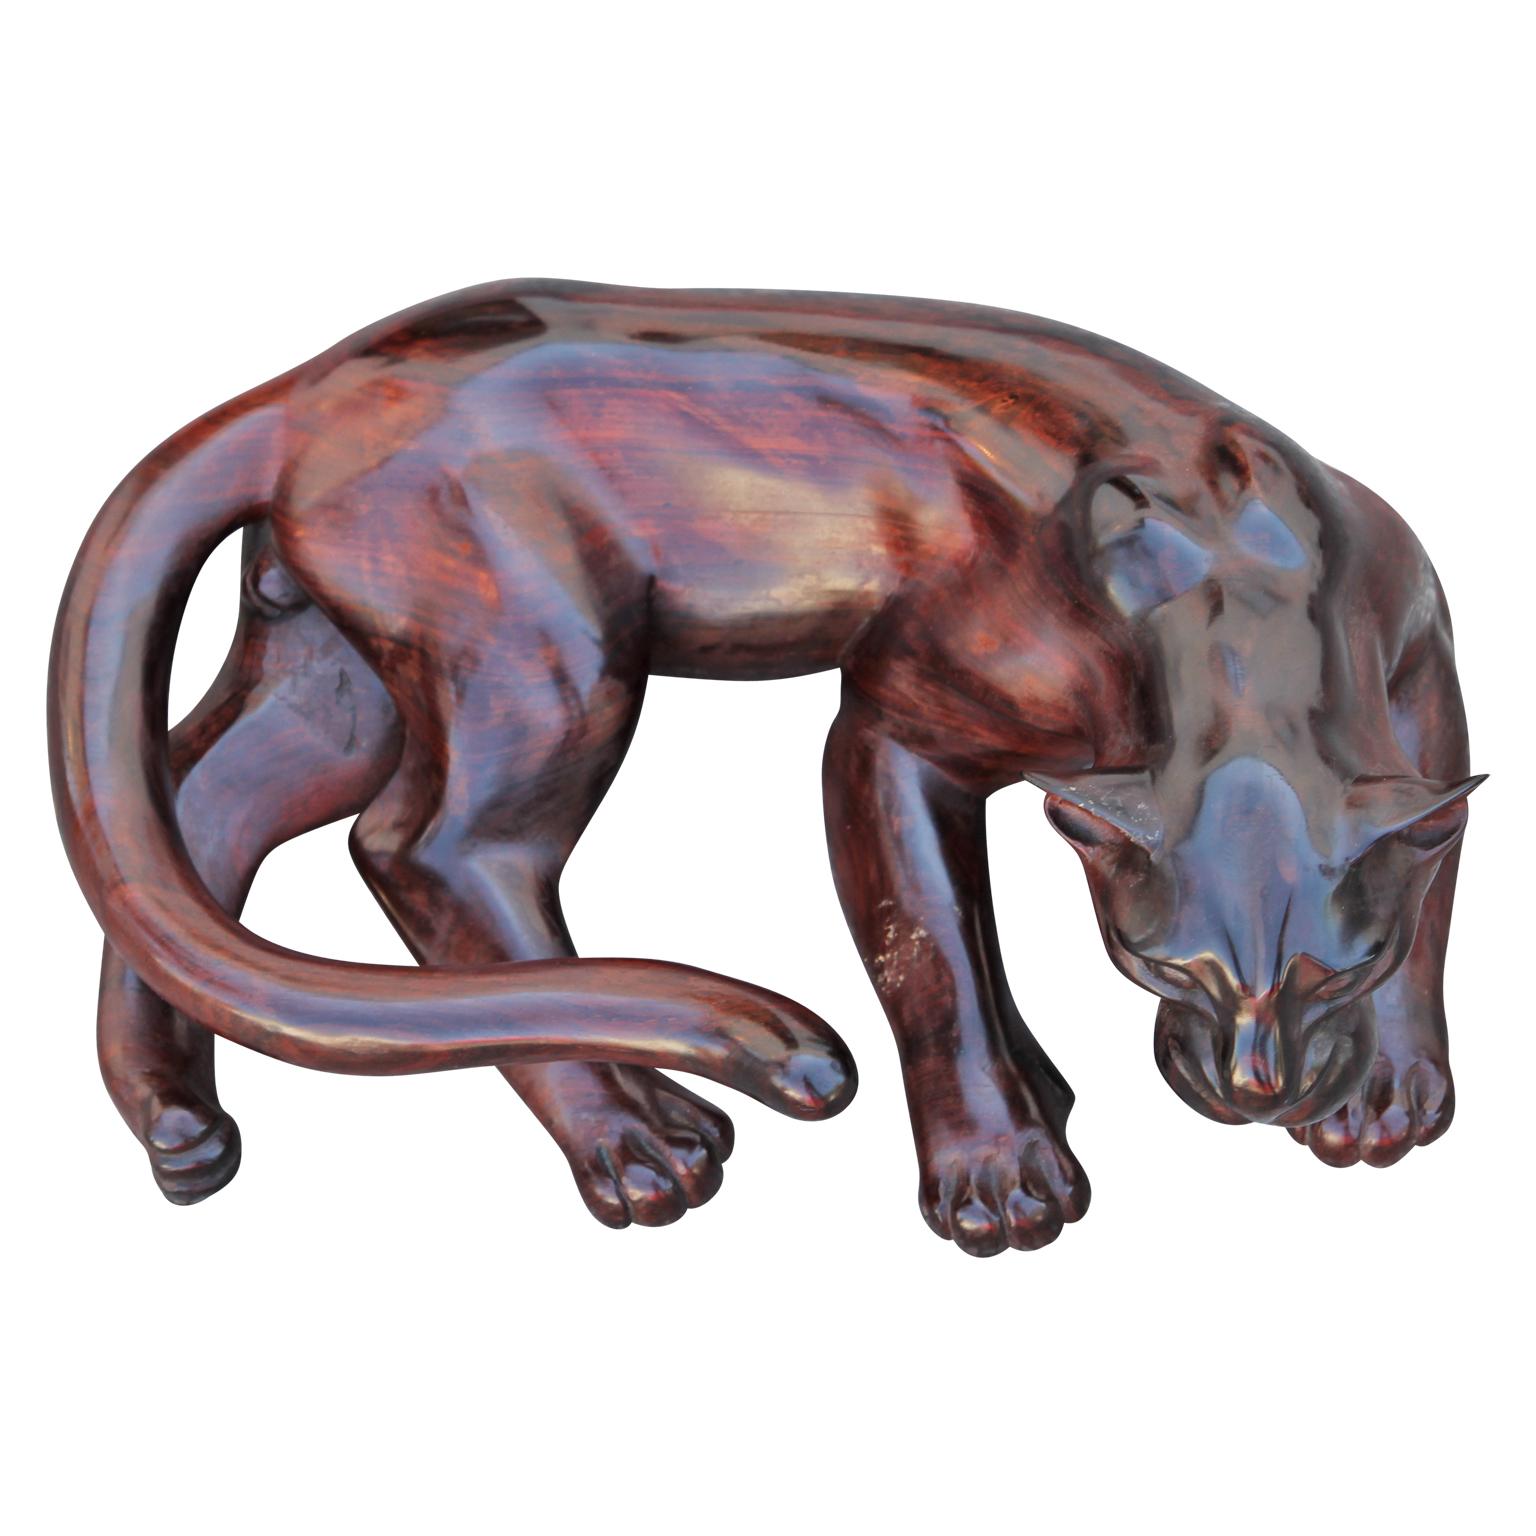 20th Century Wounaan Embera Cocobolo Wooden Cougar / Panther Sculpture by Eliciano Membache